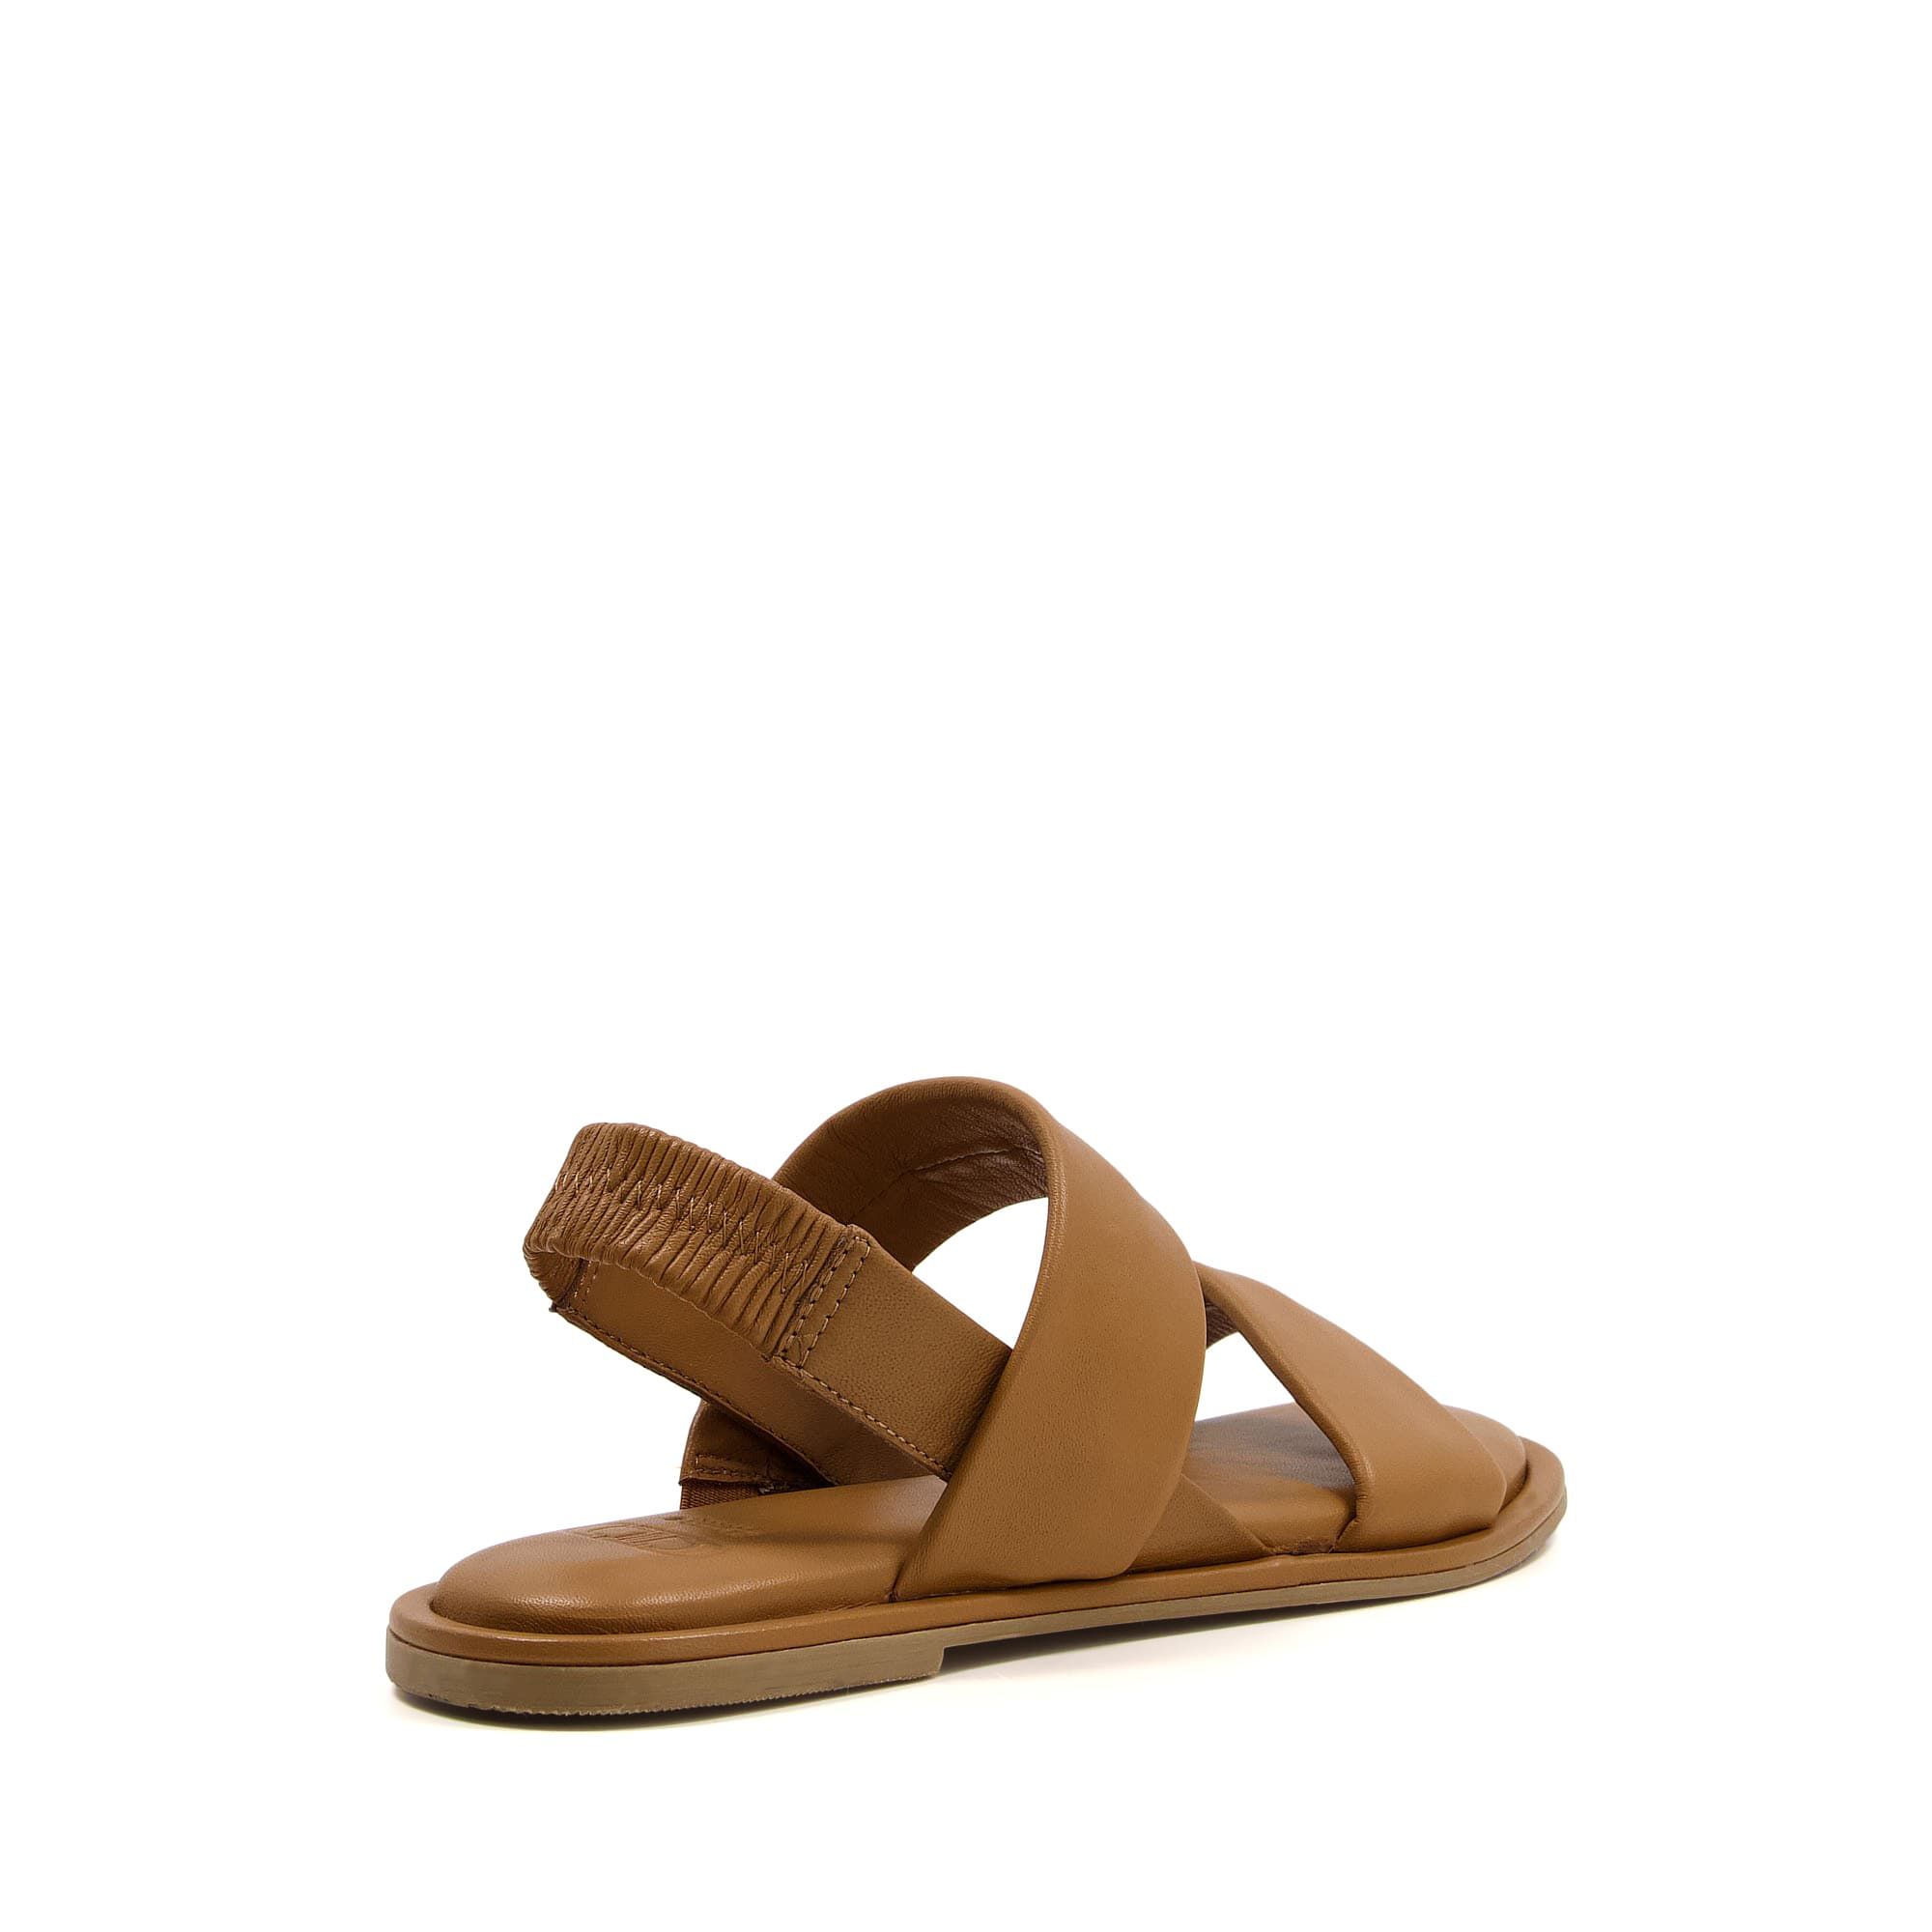 Meet the sandals you'll be living in this summer. Comfortable and stylish, they feature soft leather straps, padded footbeds and elasticated inserts.